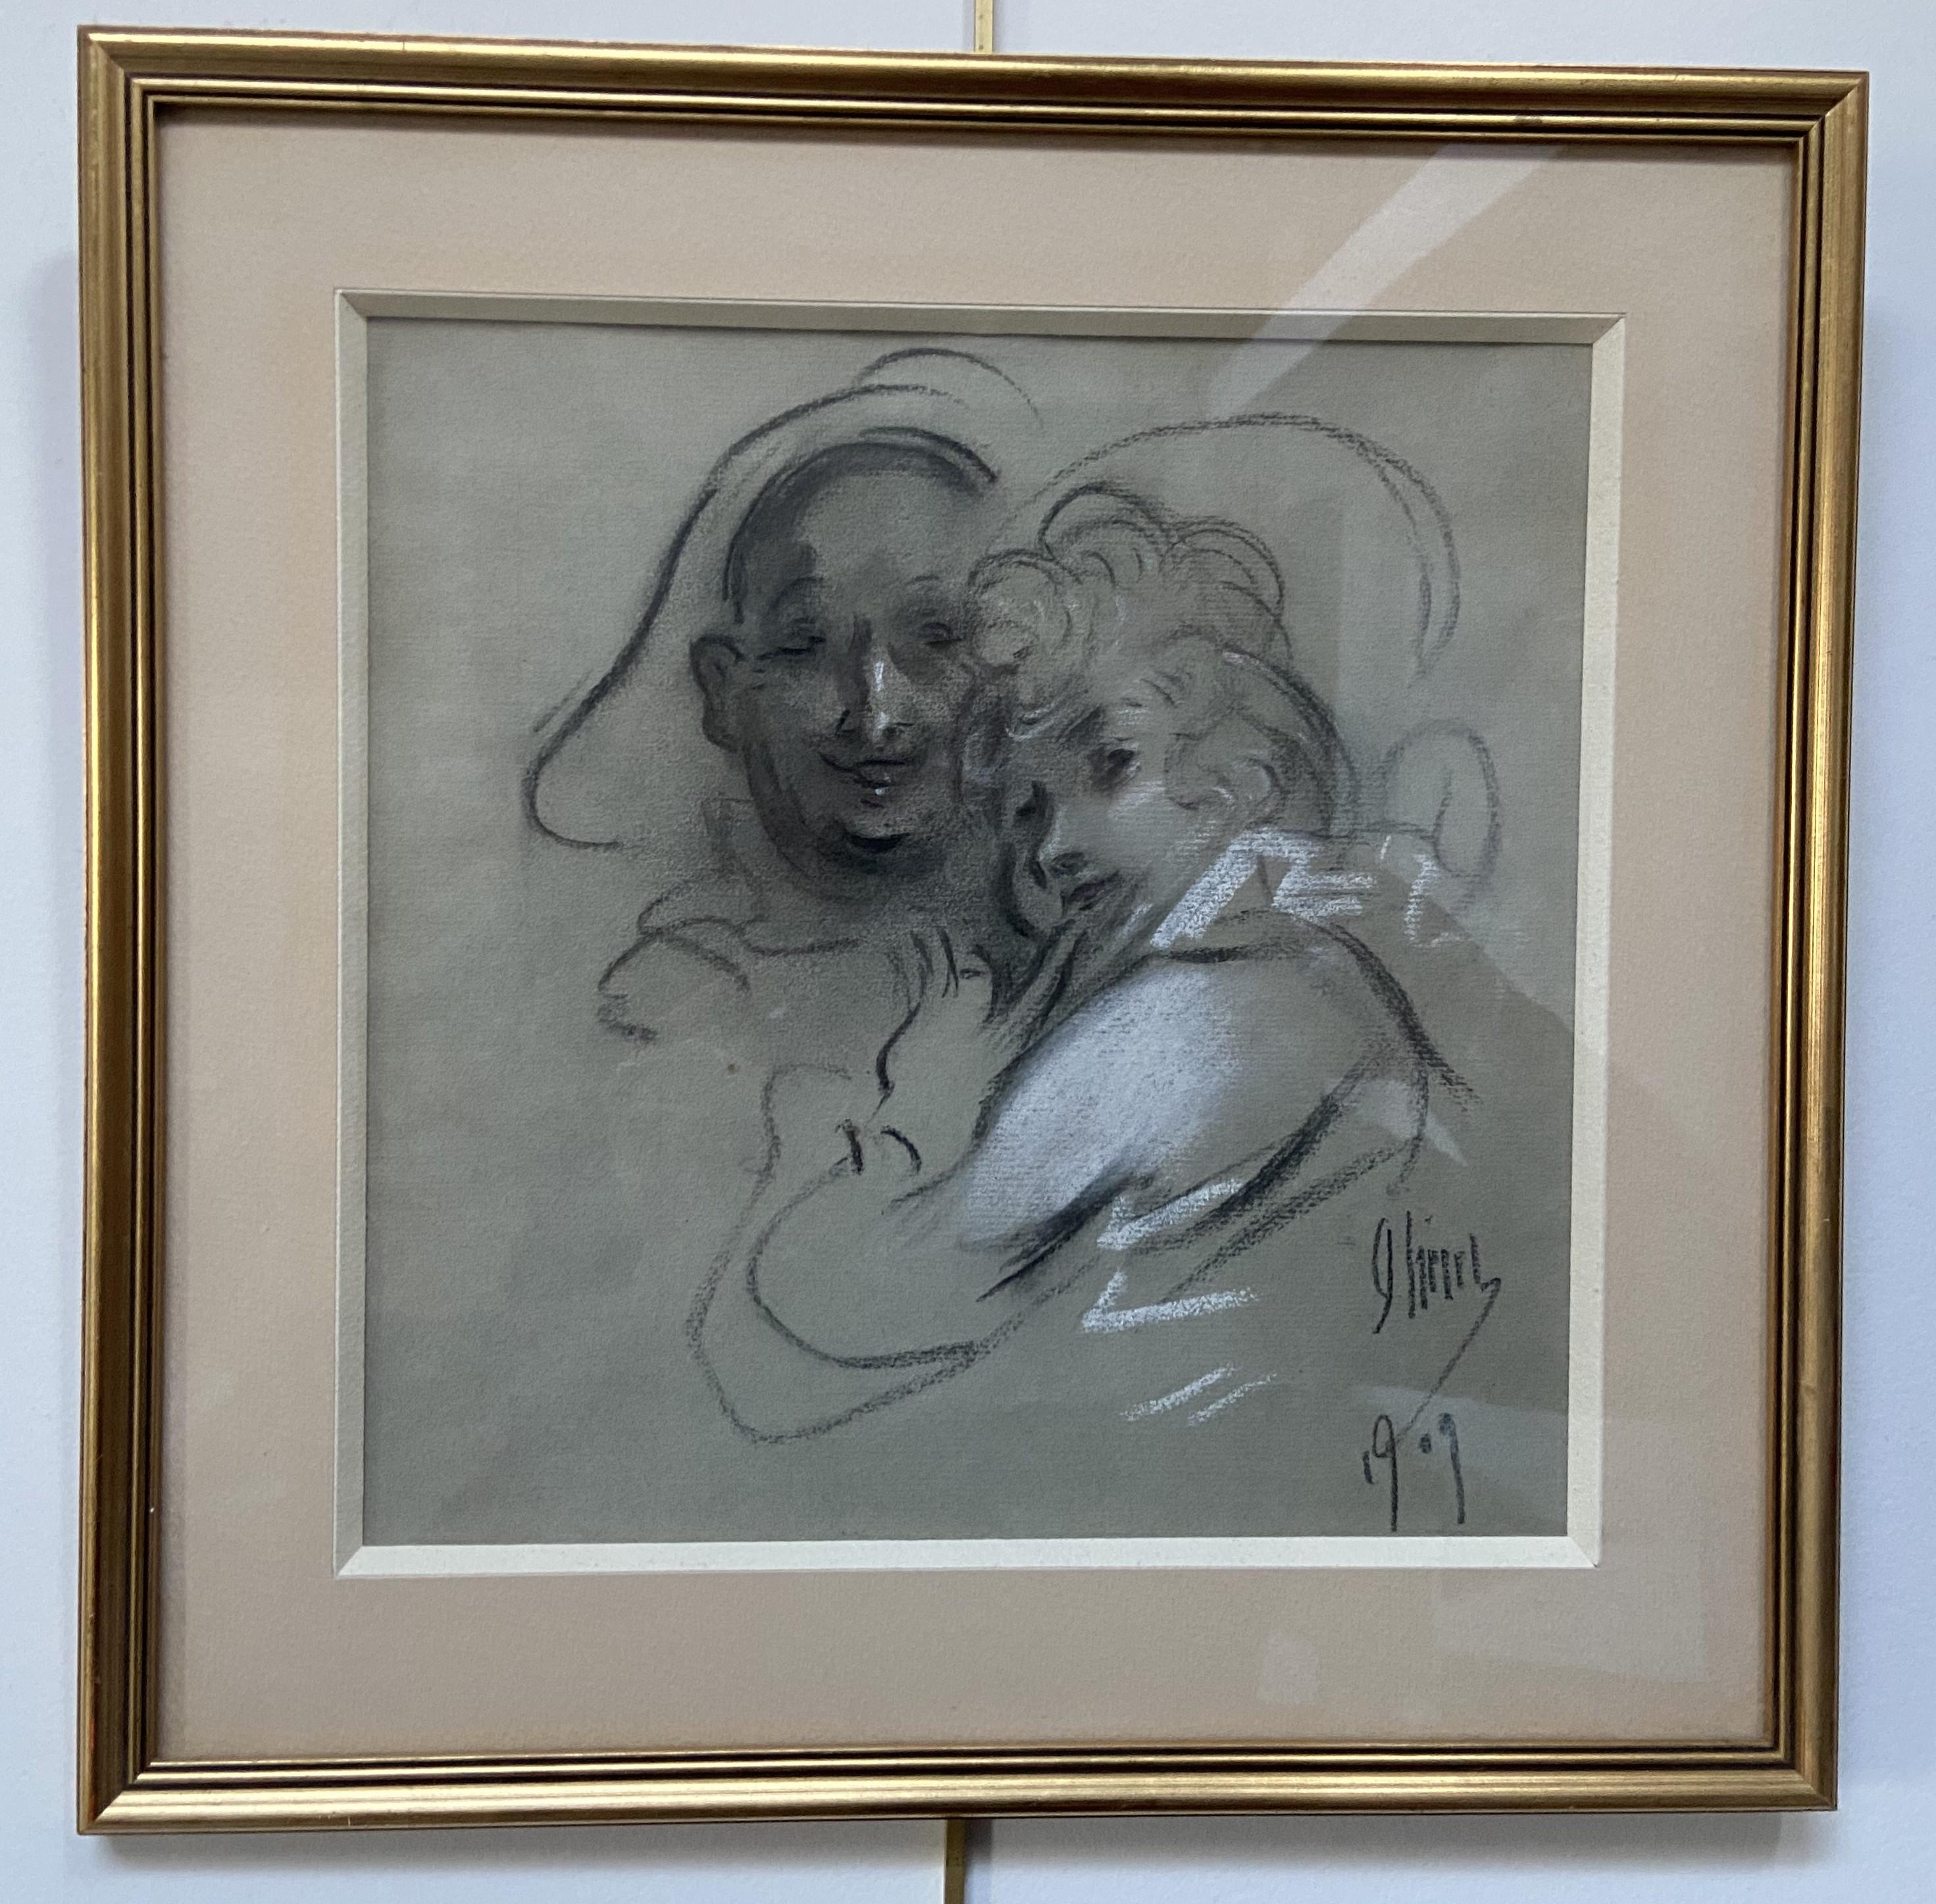 Jules Cheret (1836-1932) 
A couple, 1909
signed and dated in the lower right
Charcoal  and heightenings of white chalk
23 x 23 cm
Framed under glass : 33.8 x 33.8 cm

This work is highly representative of Jules Chéret's art, full of delicacy and